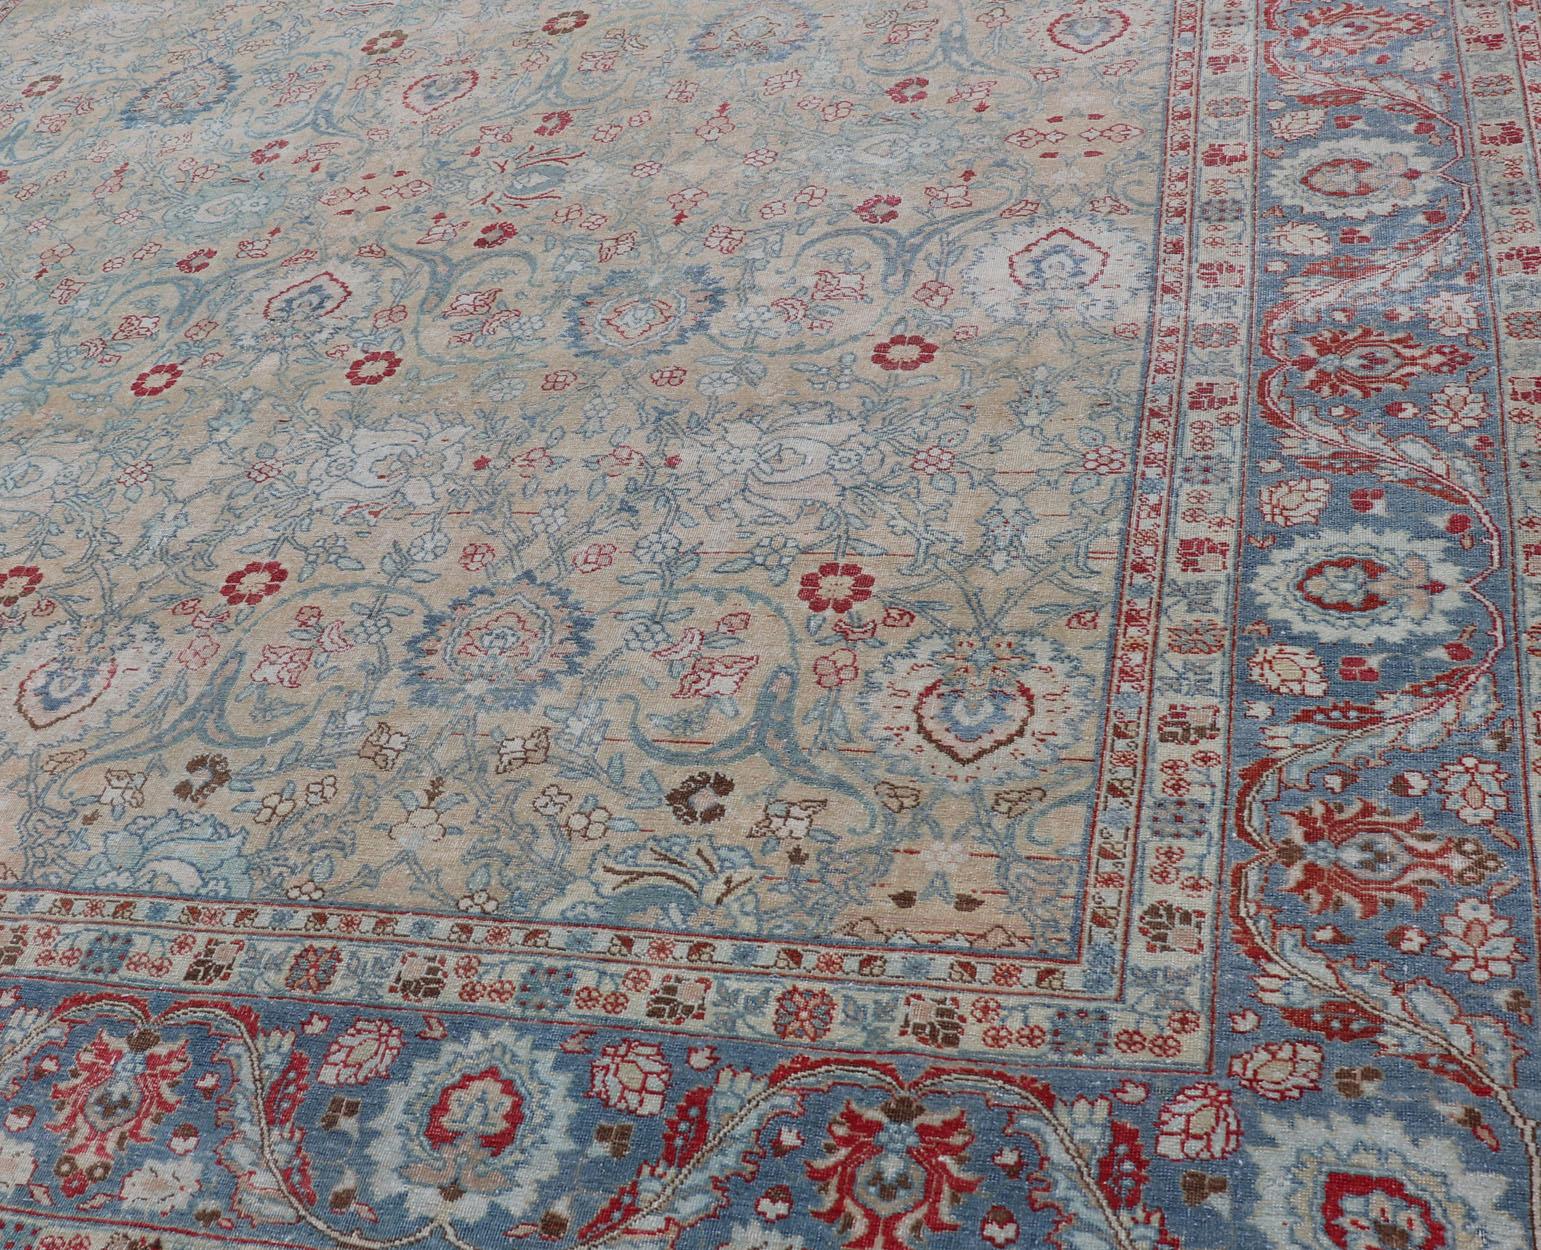  Antique Persian Khorassan Rug with Floral Design in Honey Cream & Dusty Blue For Sale 5